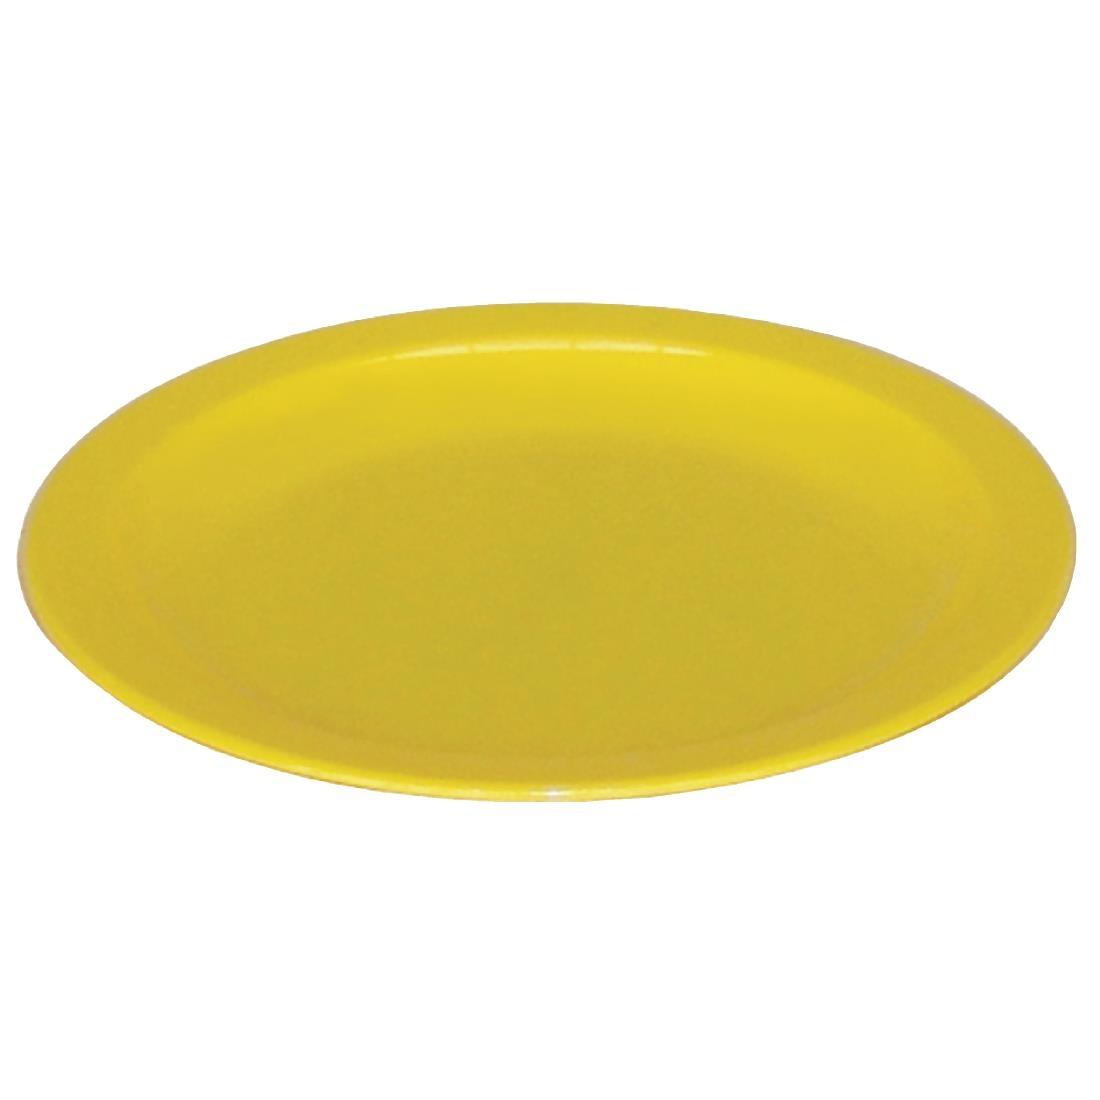 Olympia Kristallon Polycarbonate Plates Yellow 230mm (Pack of 12) - CB767  - 1